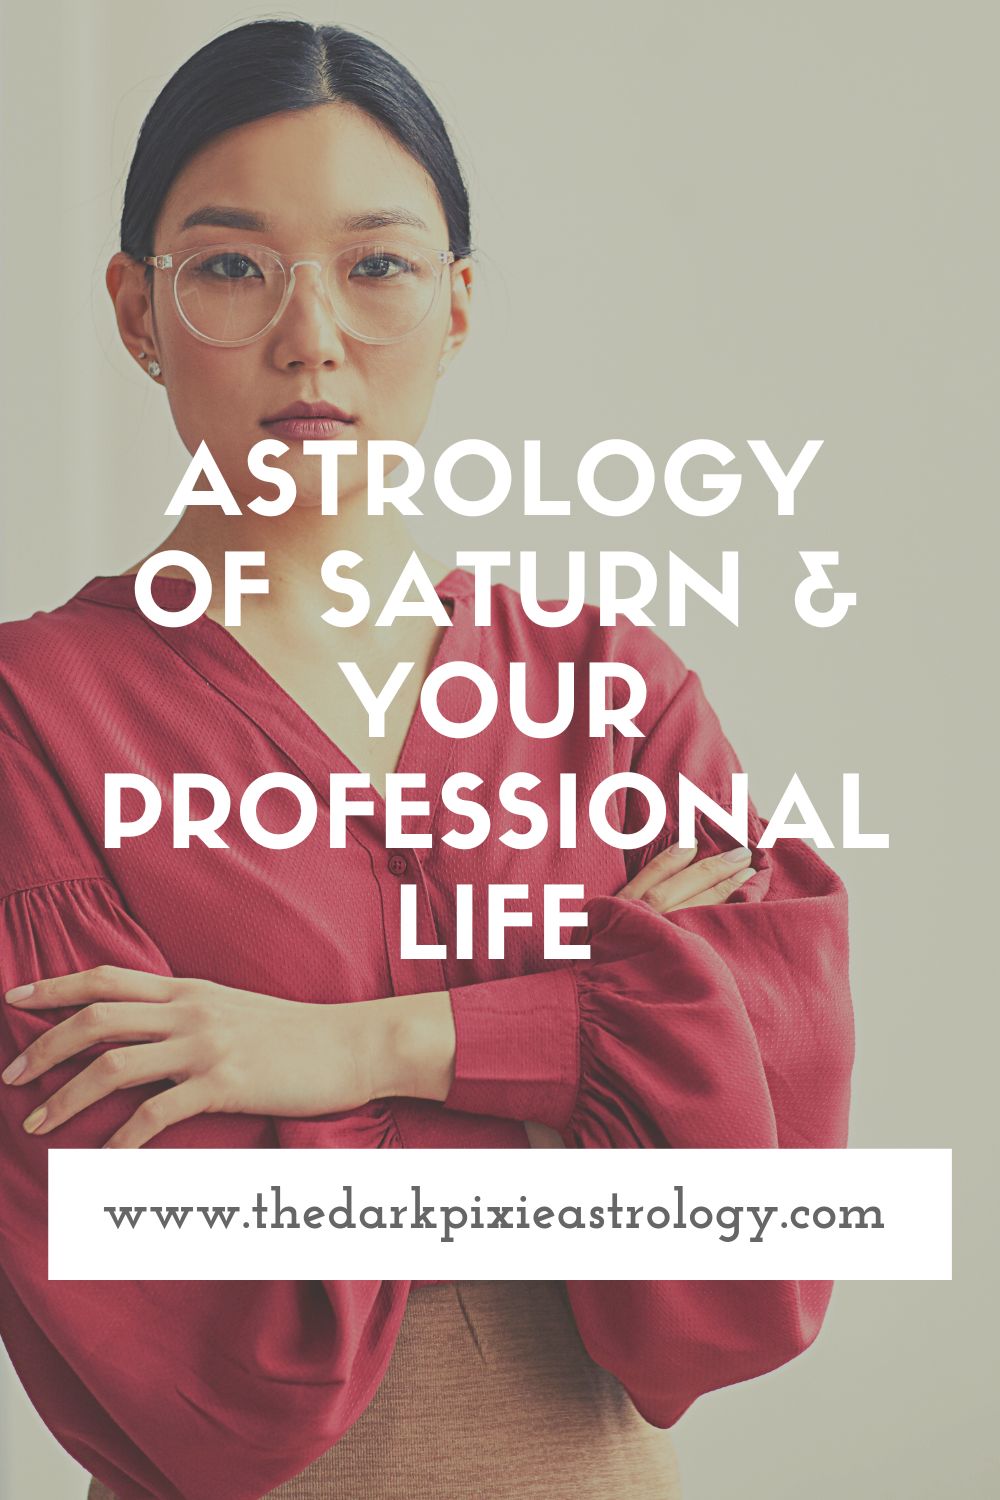 Astrology of Saturn & Your Professional Life - The Dark Pixie Astrology